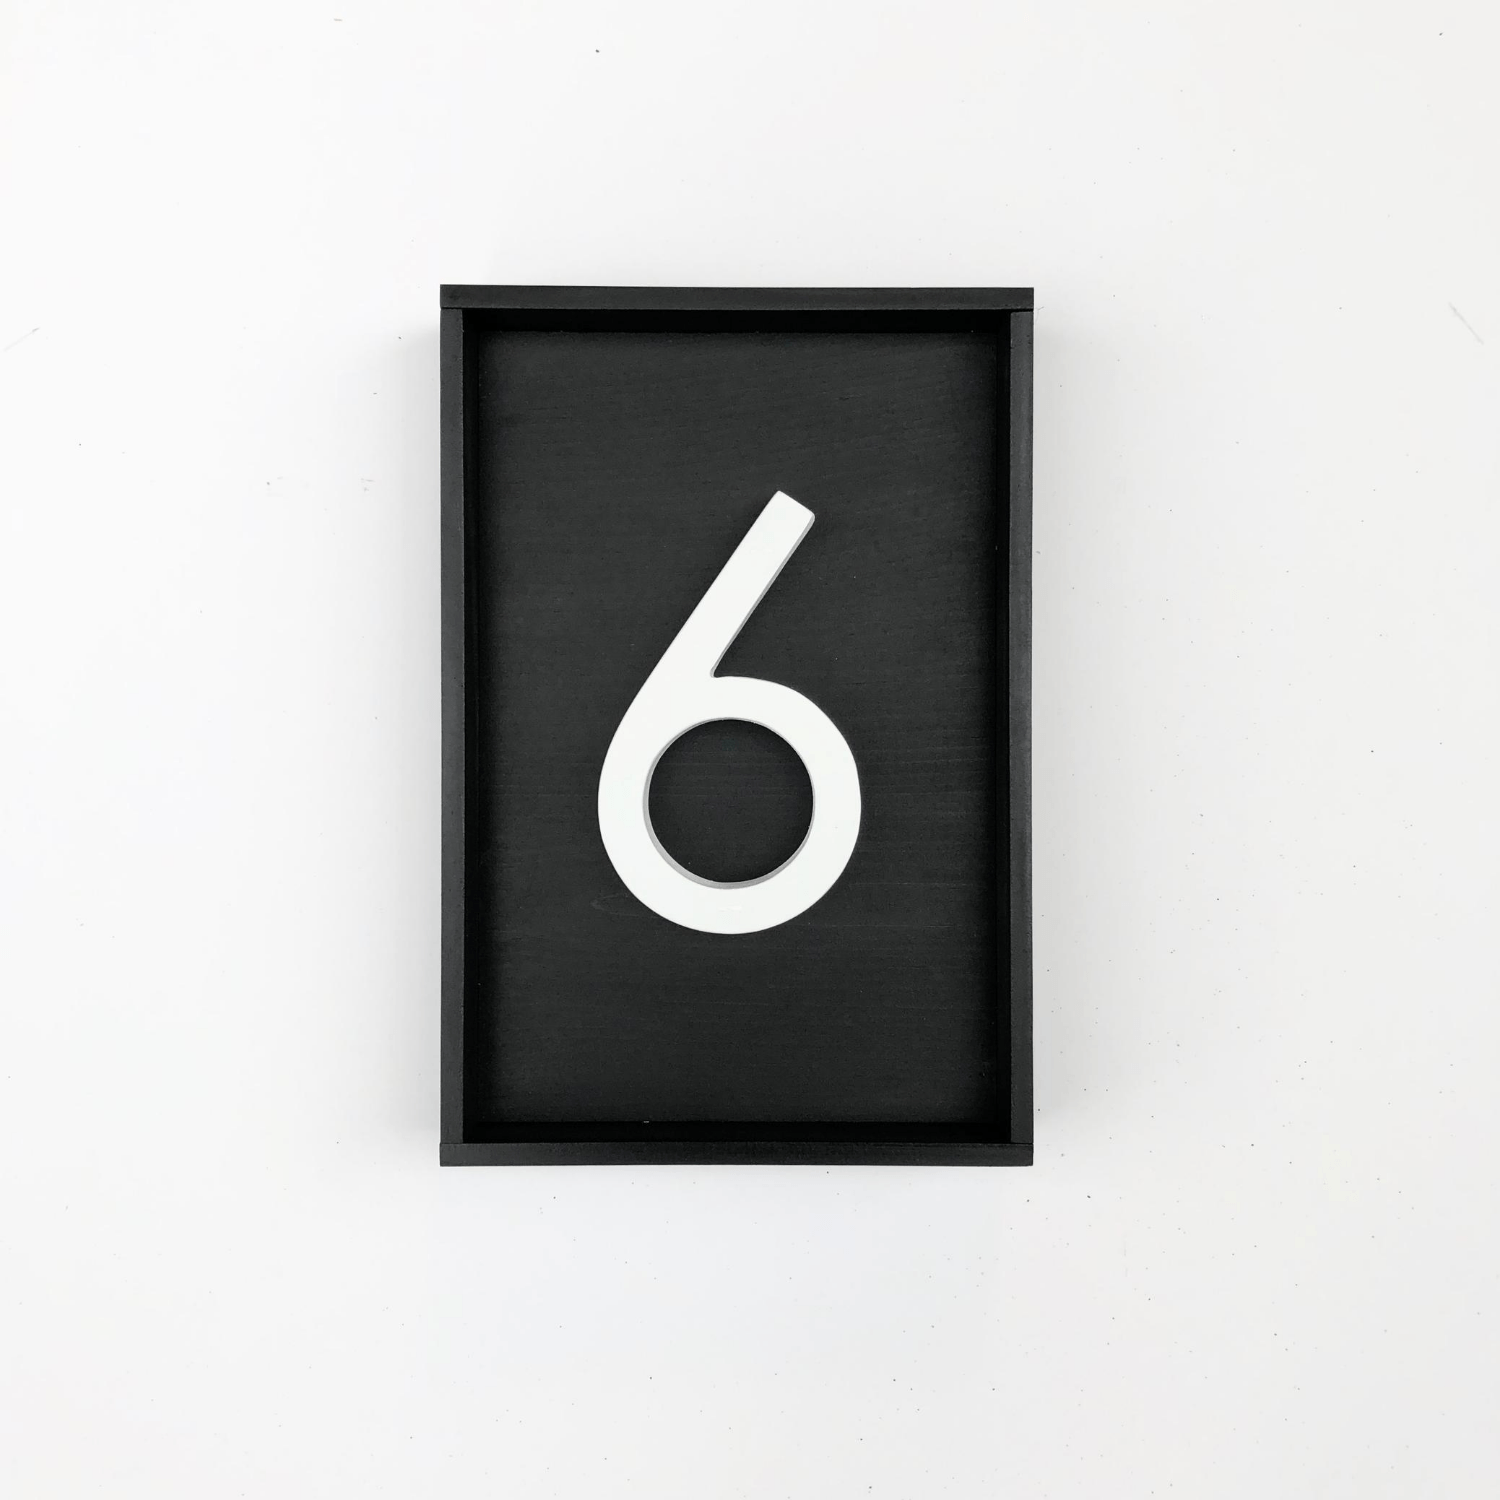 Wood address sign with black base with 1 modern white PVC number 